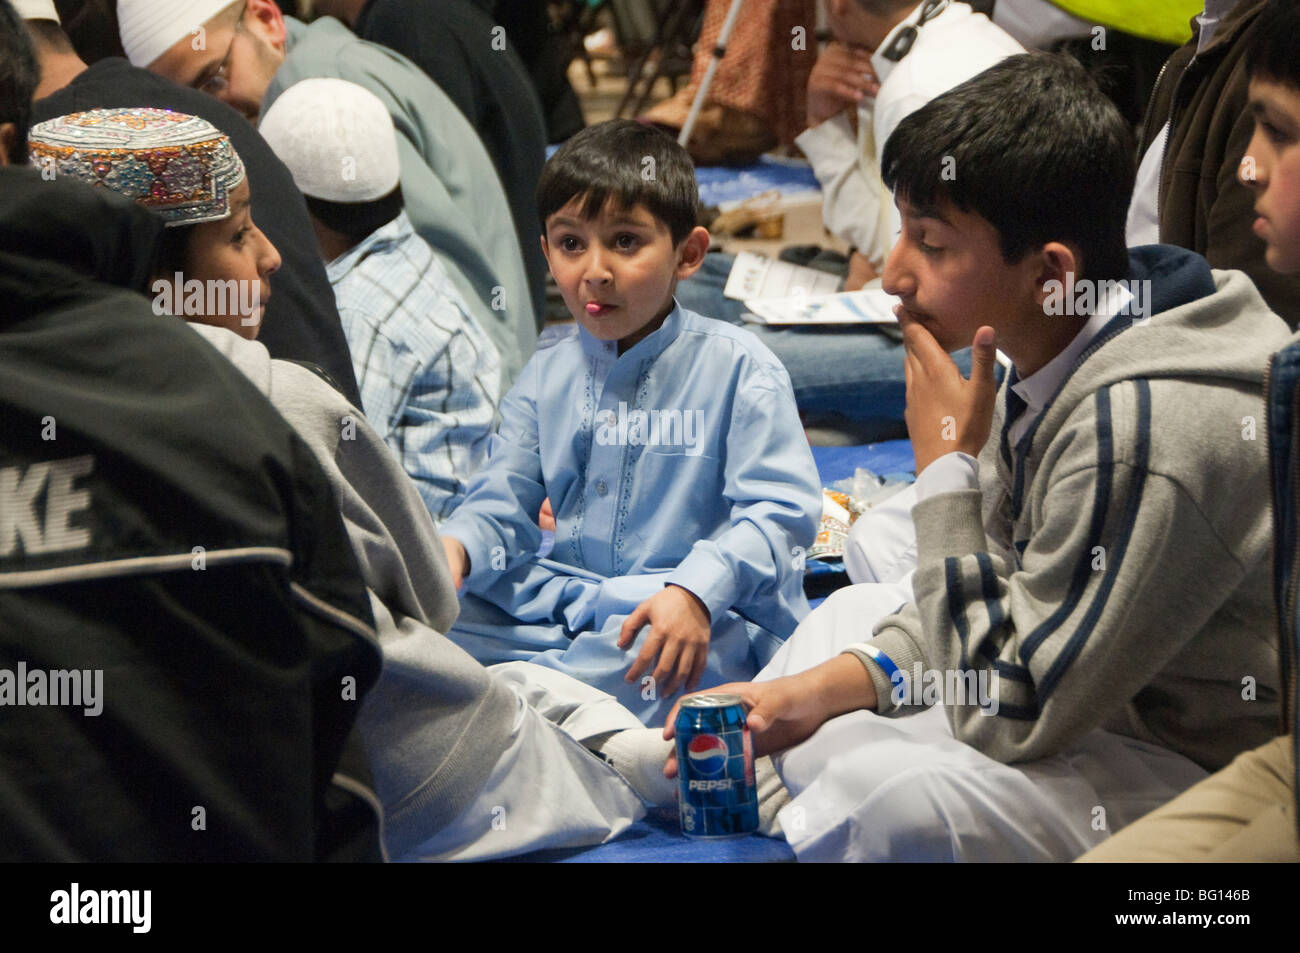 Boys in audience at Eid Milad-Un-Nabi Celebrations at Sunni Muslim Association, Tooting, London. Stock Photo